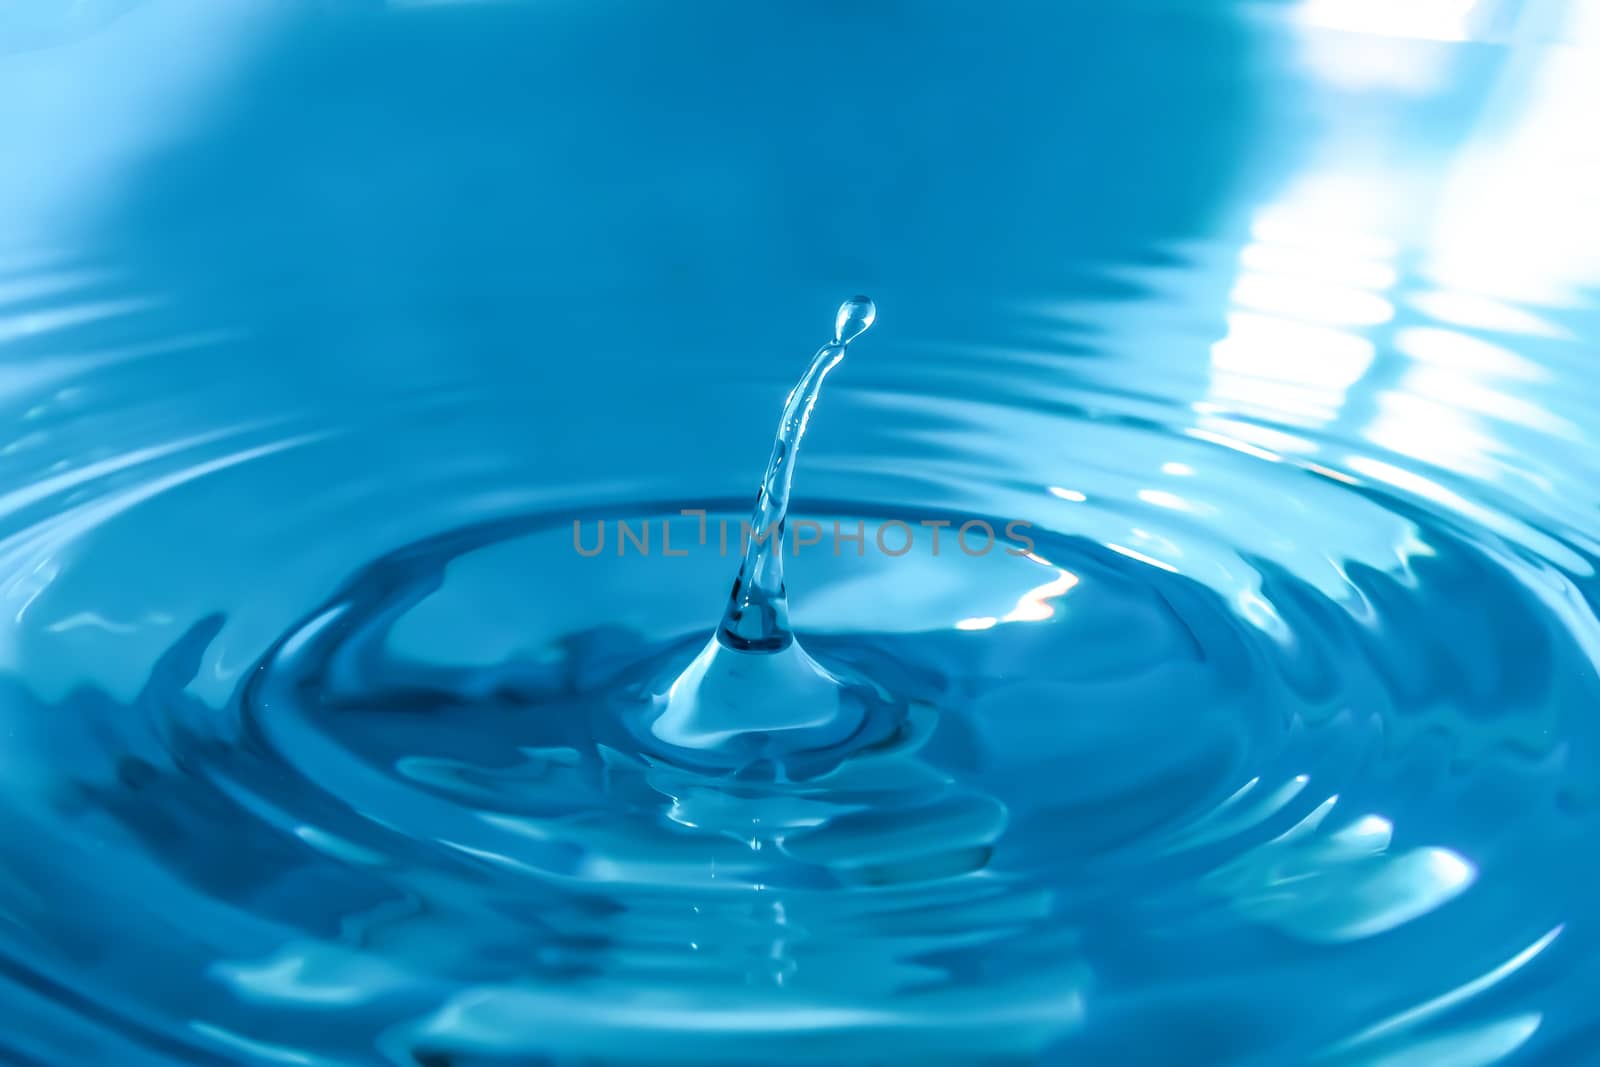 Water splash close-up. Drop of water. Blue water drop. Falling blue water surface with splash and air bubbles